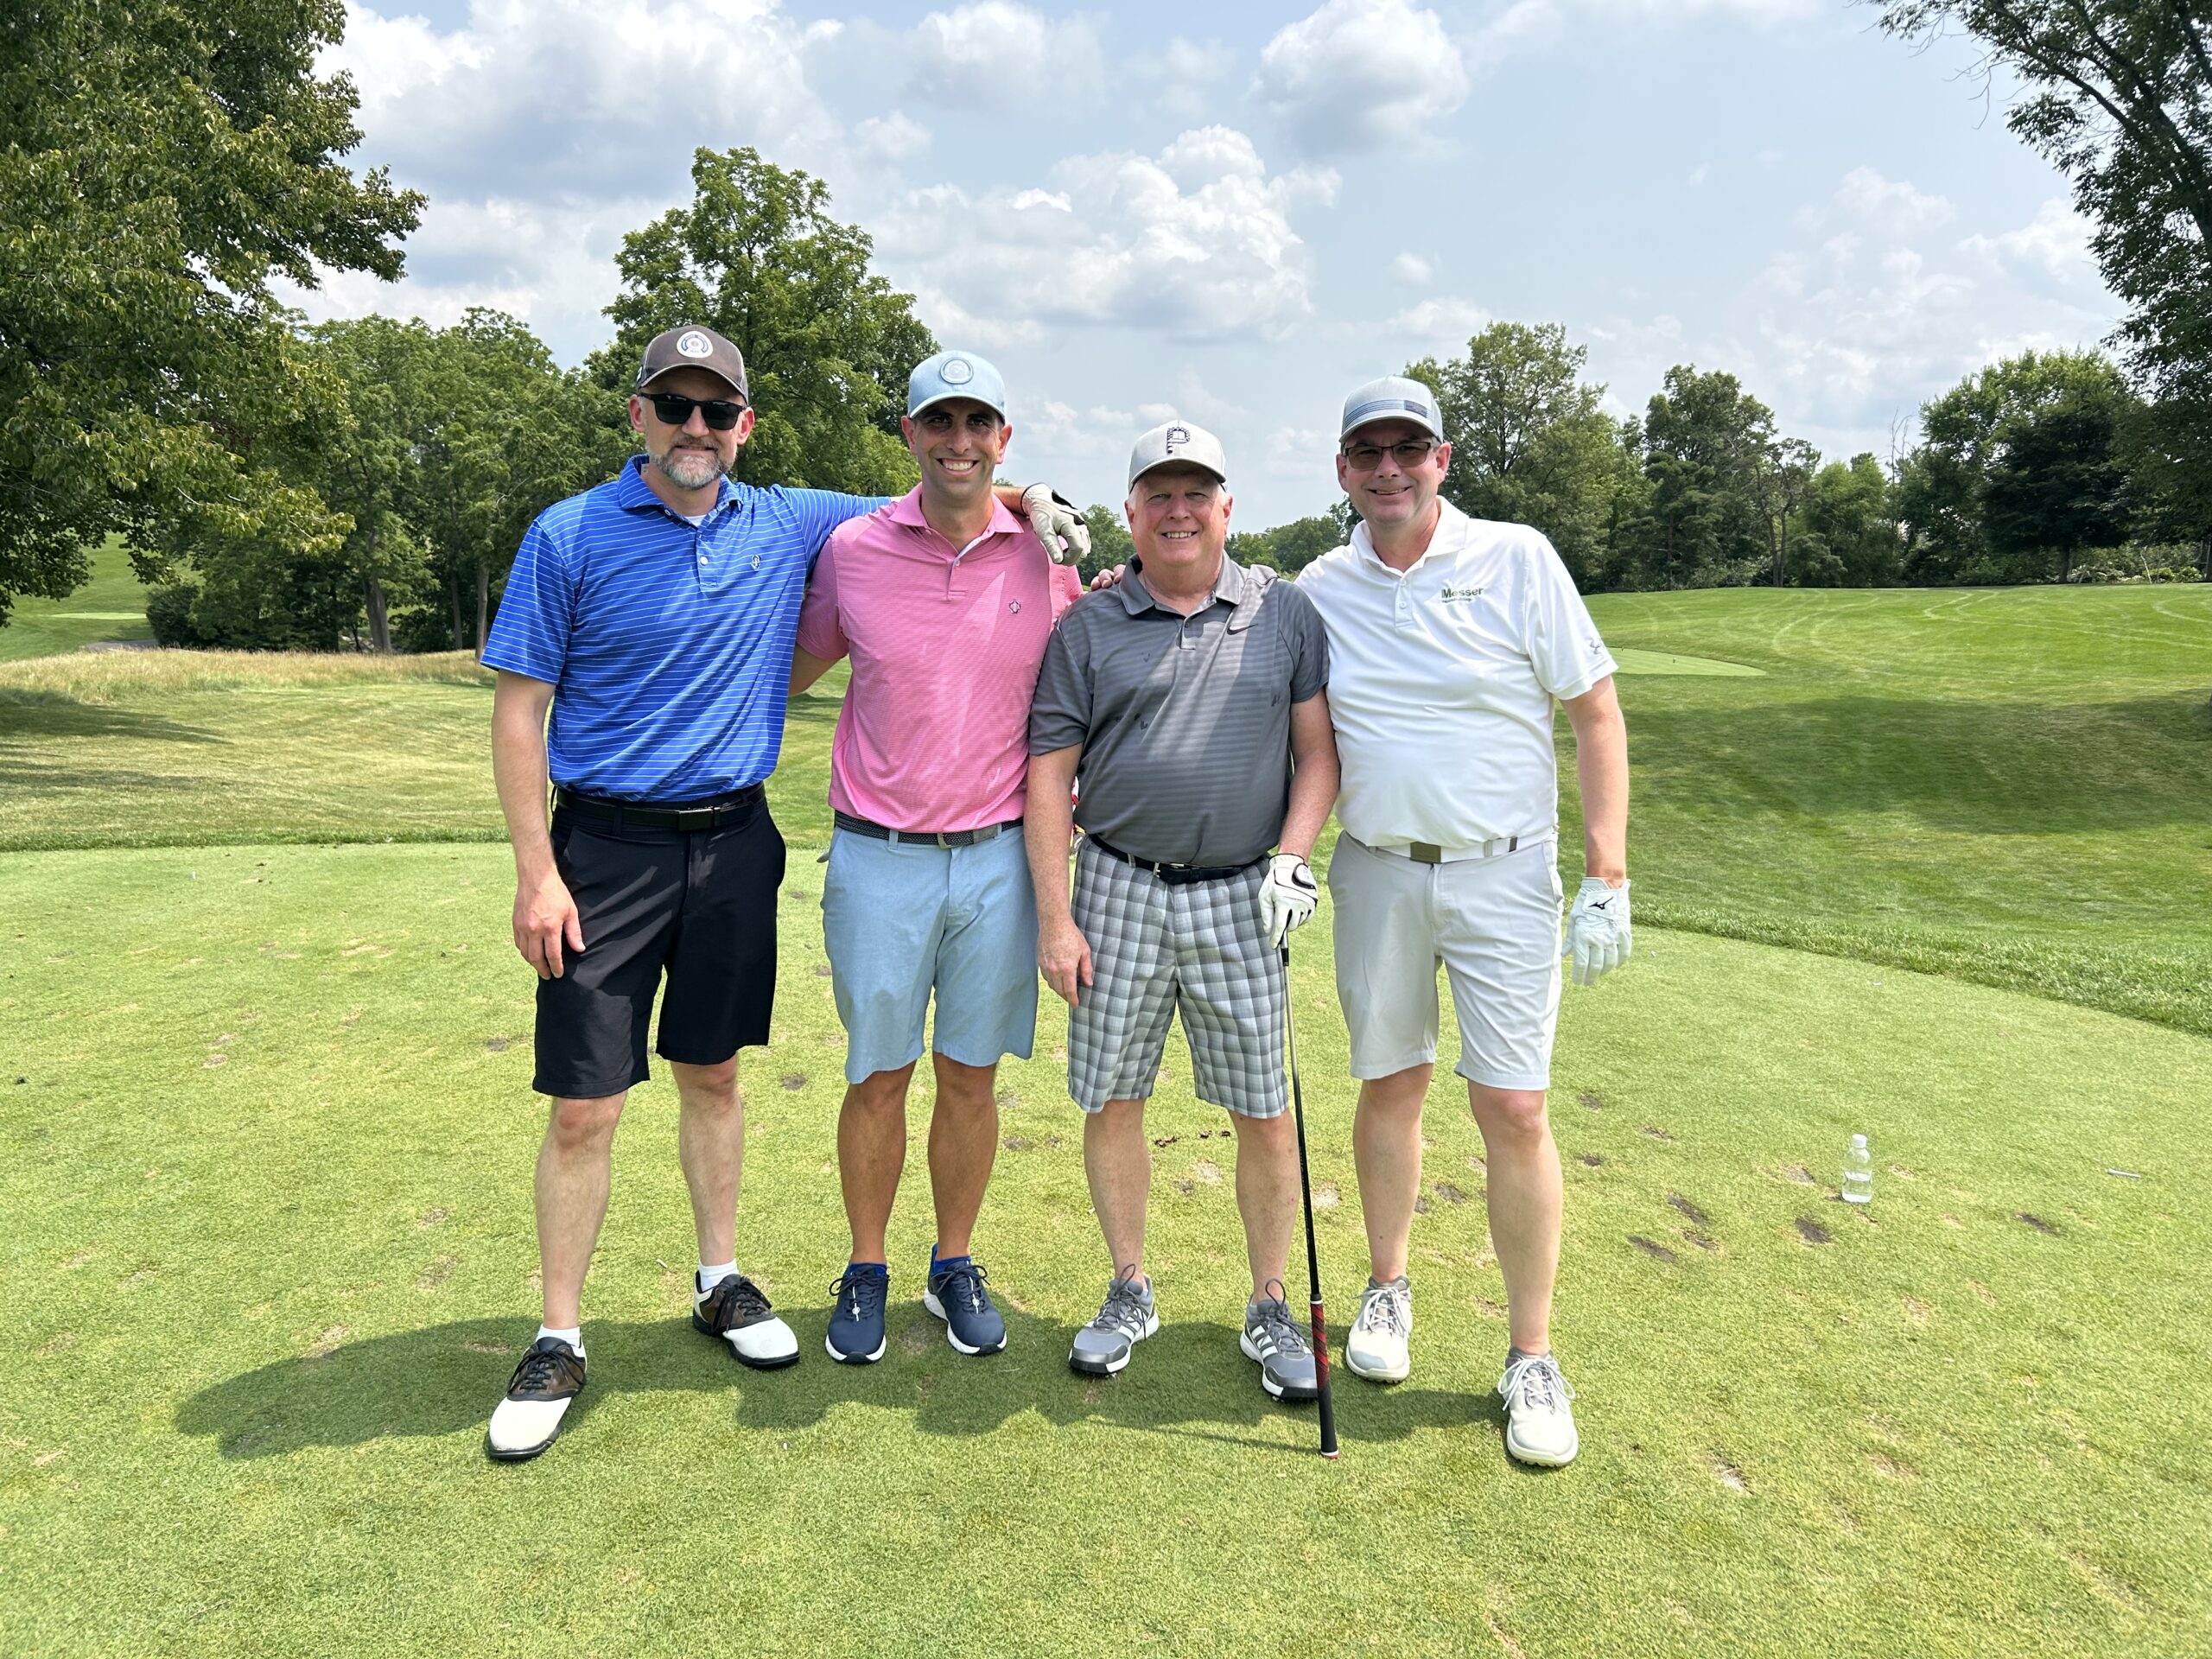 Messer Construction Company employees on the golf course